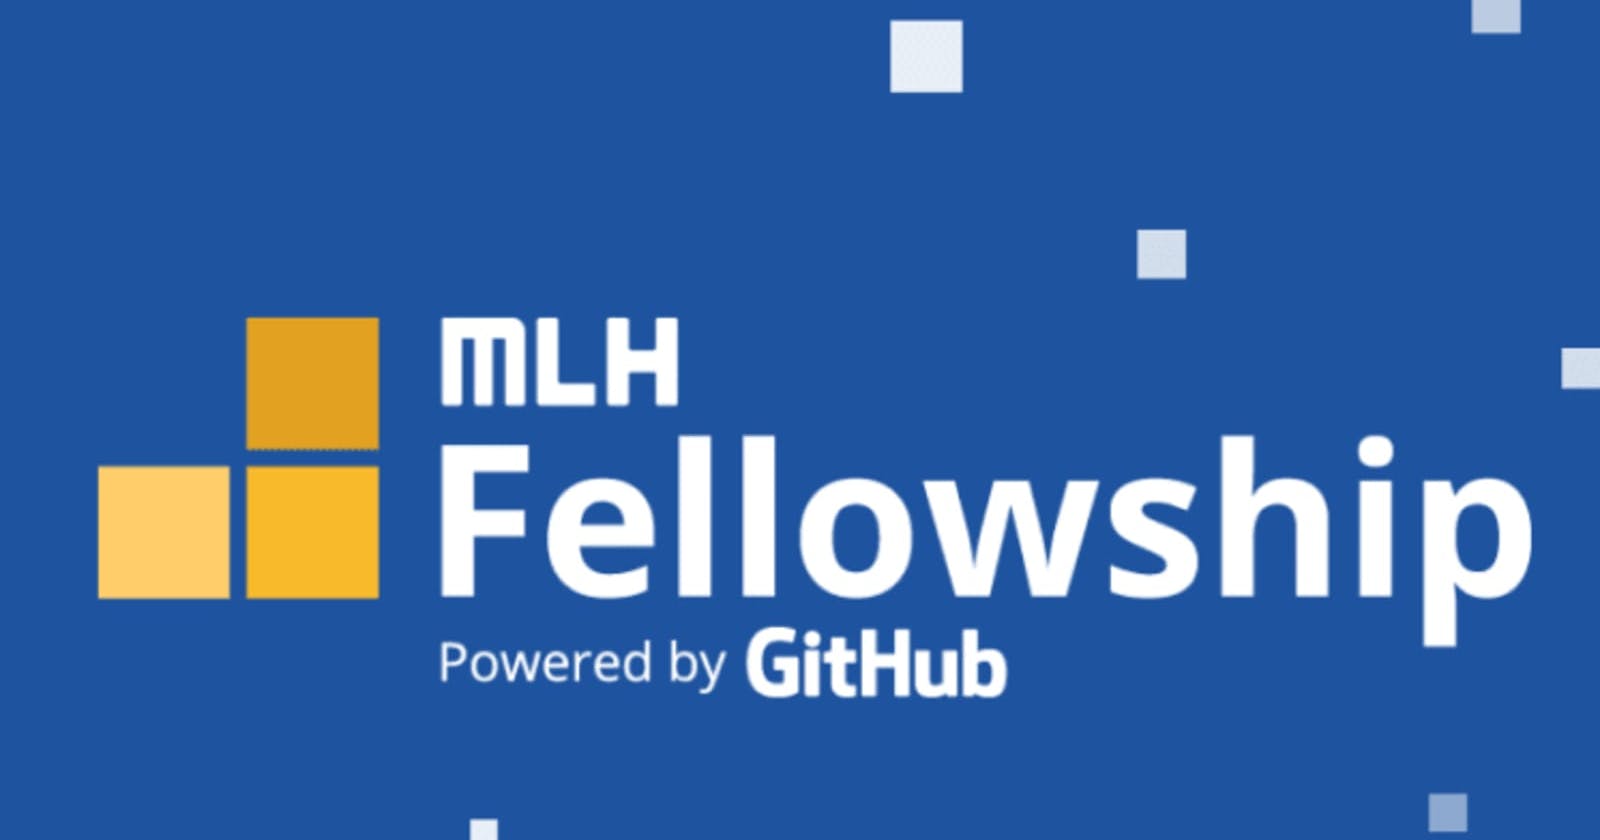 My experience half of the MLH Explorer Fellowship